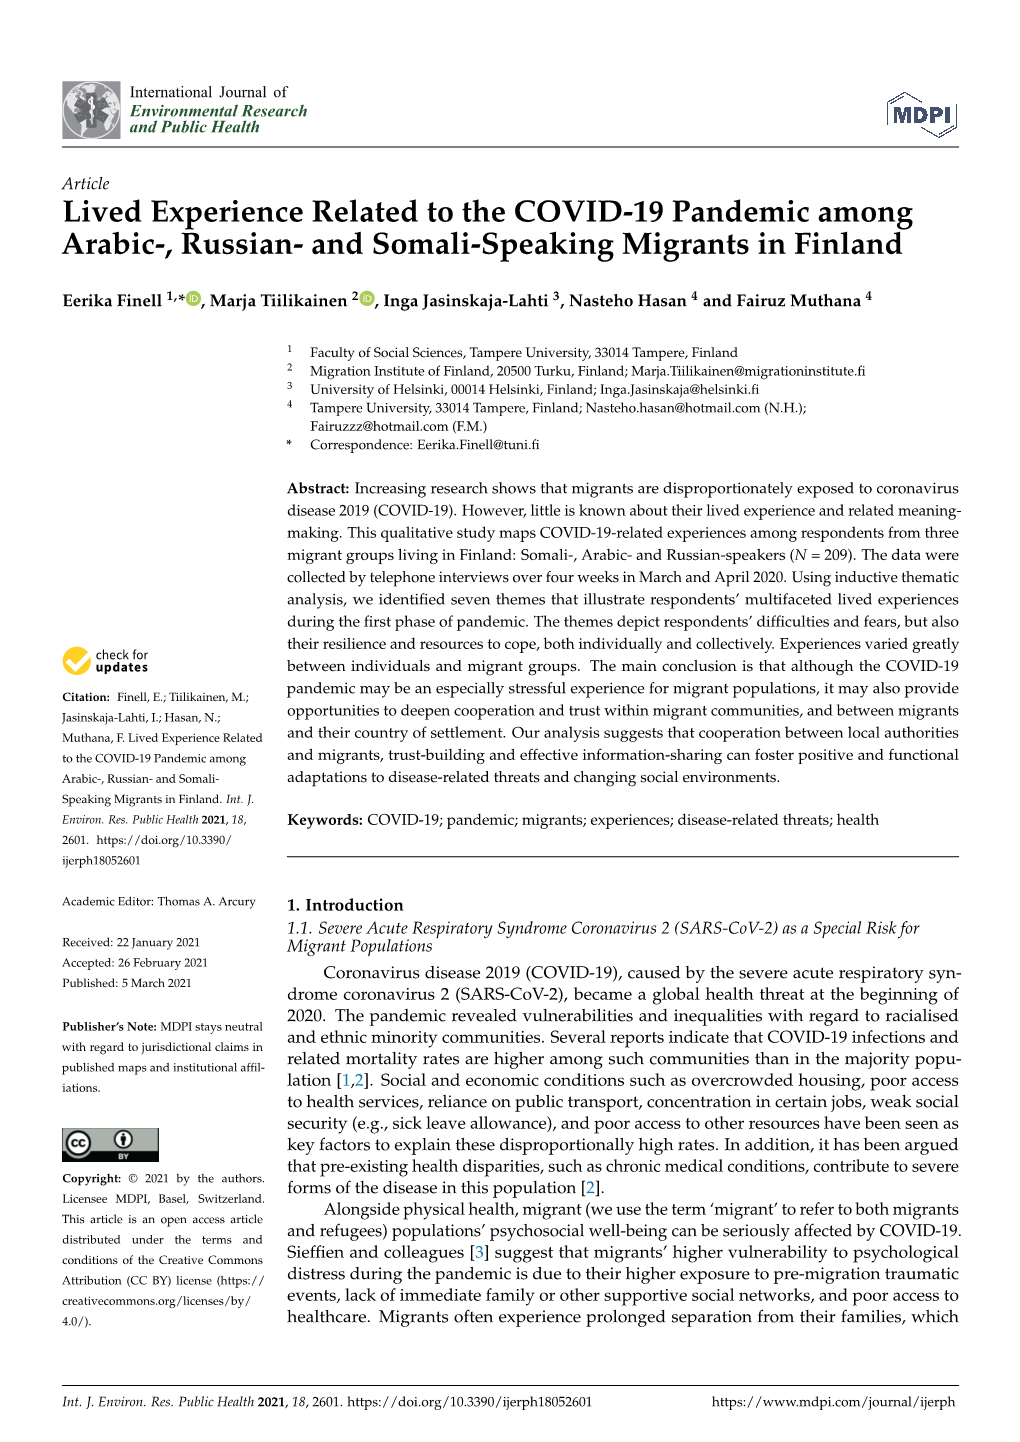 Lived Experience Related to the COVID-19 Pandemic Among Arabic-, Russian- and Somali-Speaking Migrants in Finland